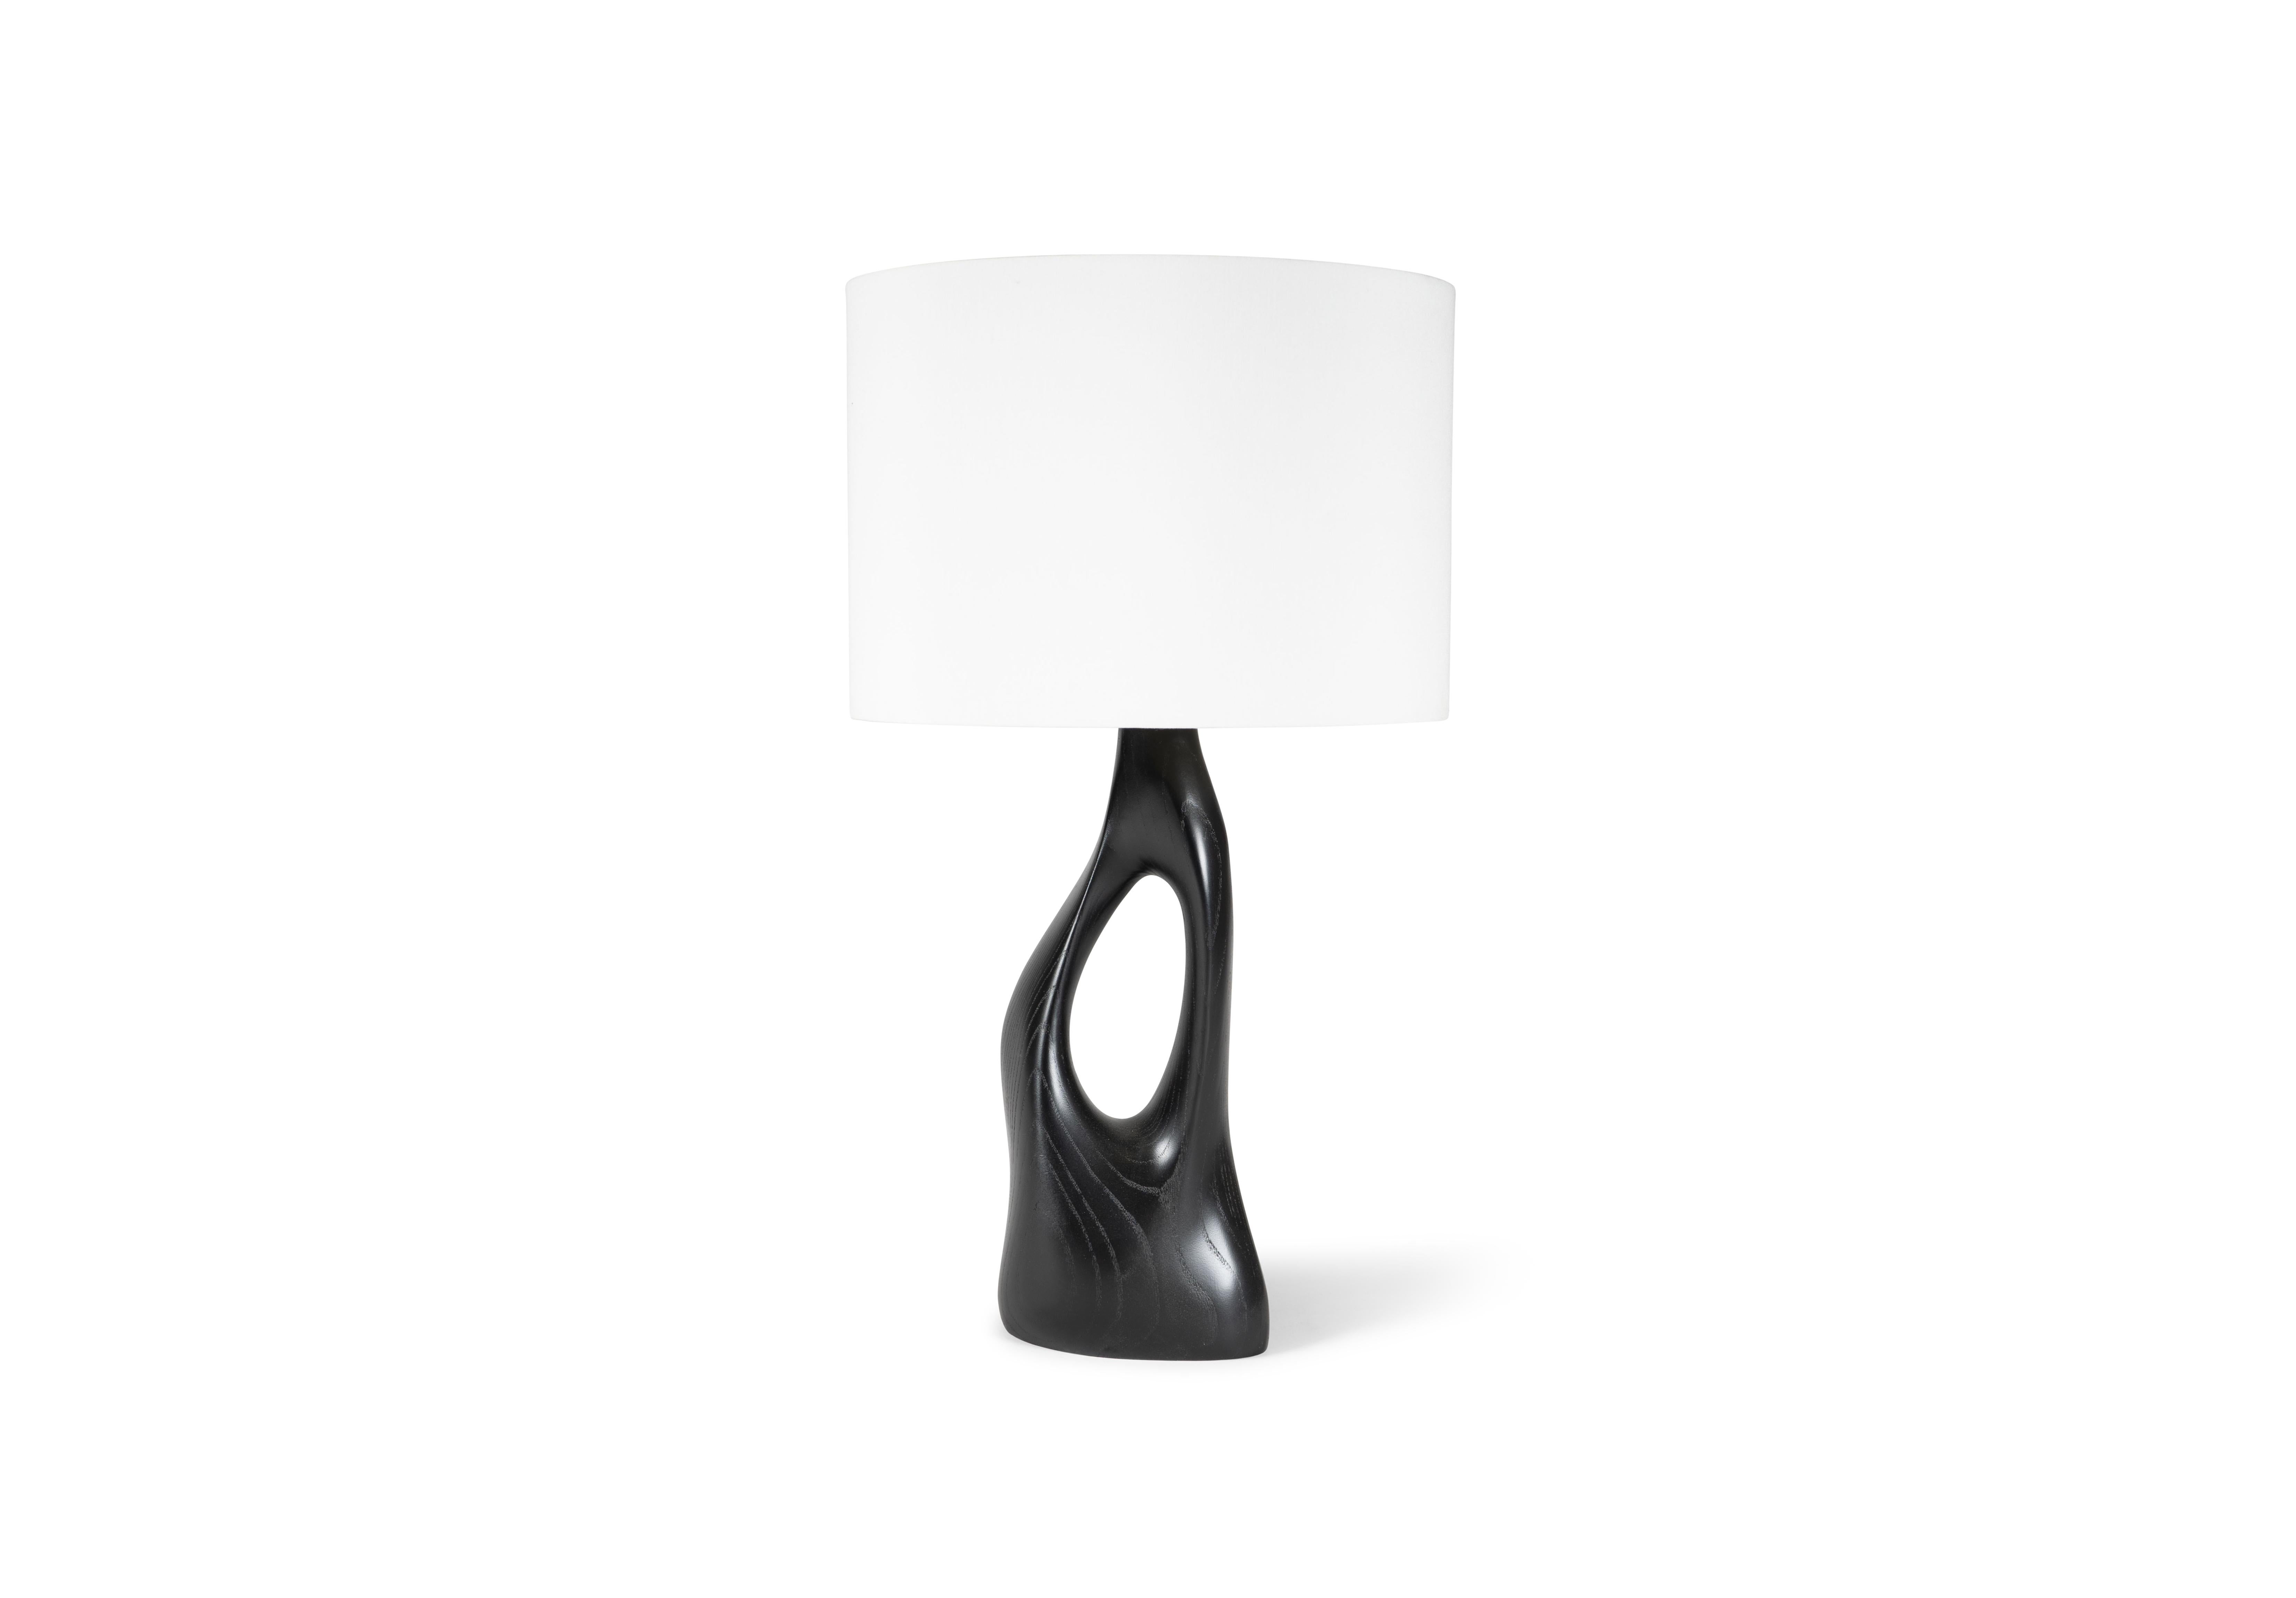 The Helix table lamp offers a unique and modern look for luxury homes. With its contemporary design, this table lamp is sure to add a touch of elegance to any space. Available with either a round or oval shade, you can choose the option that best